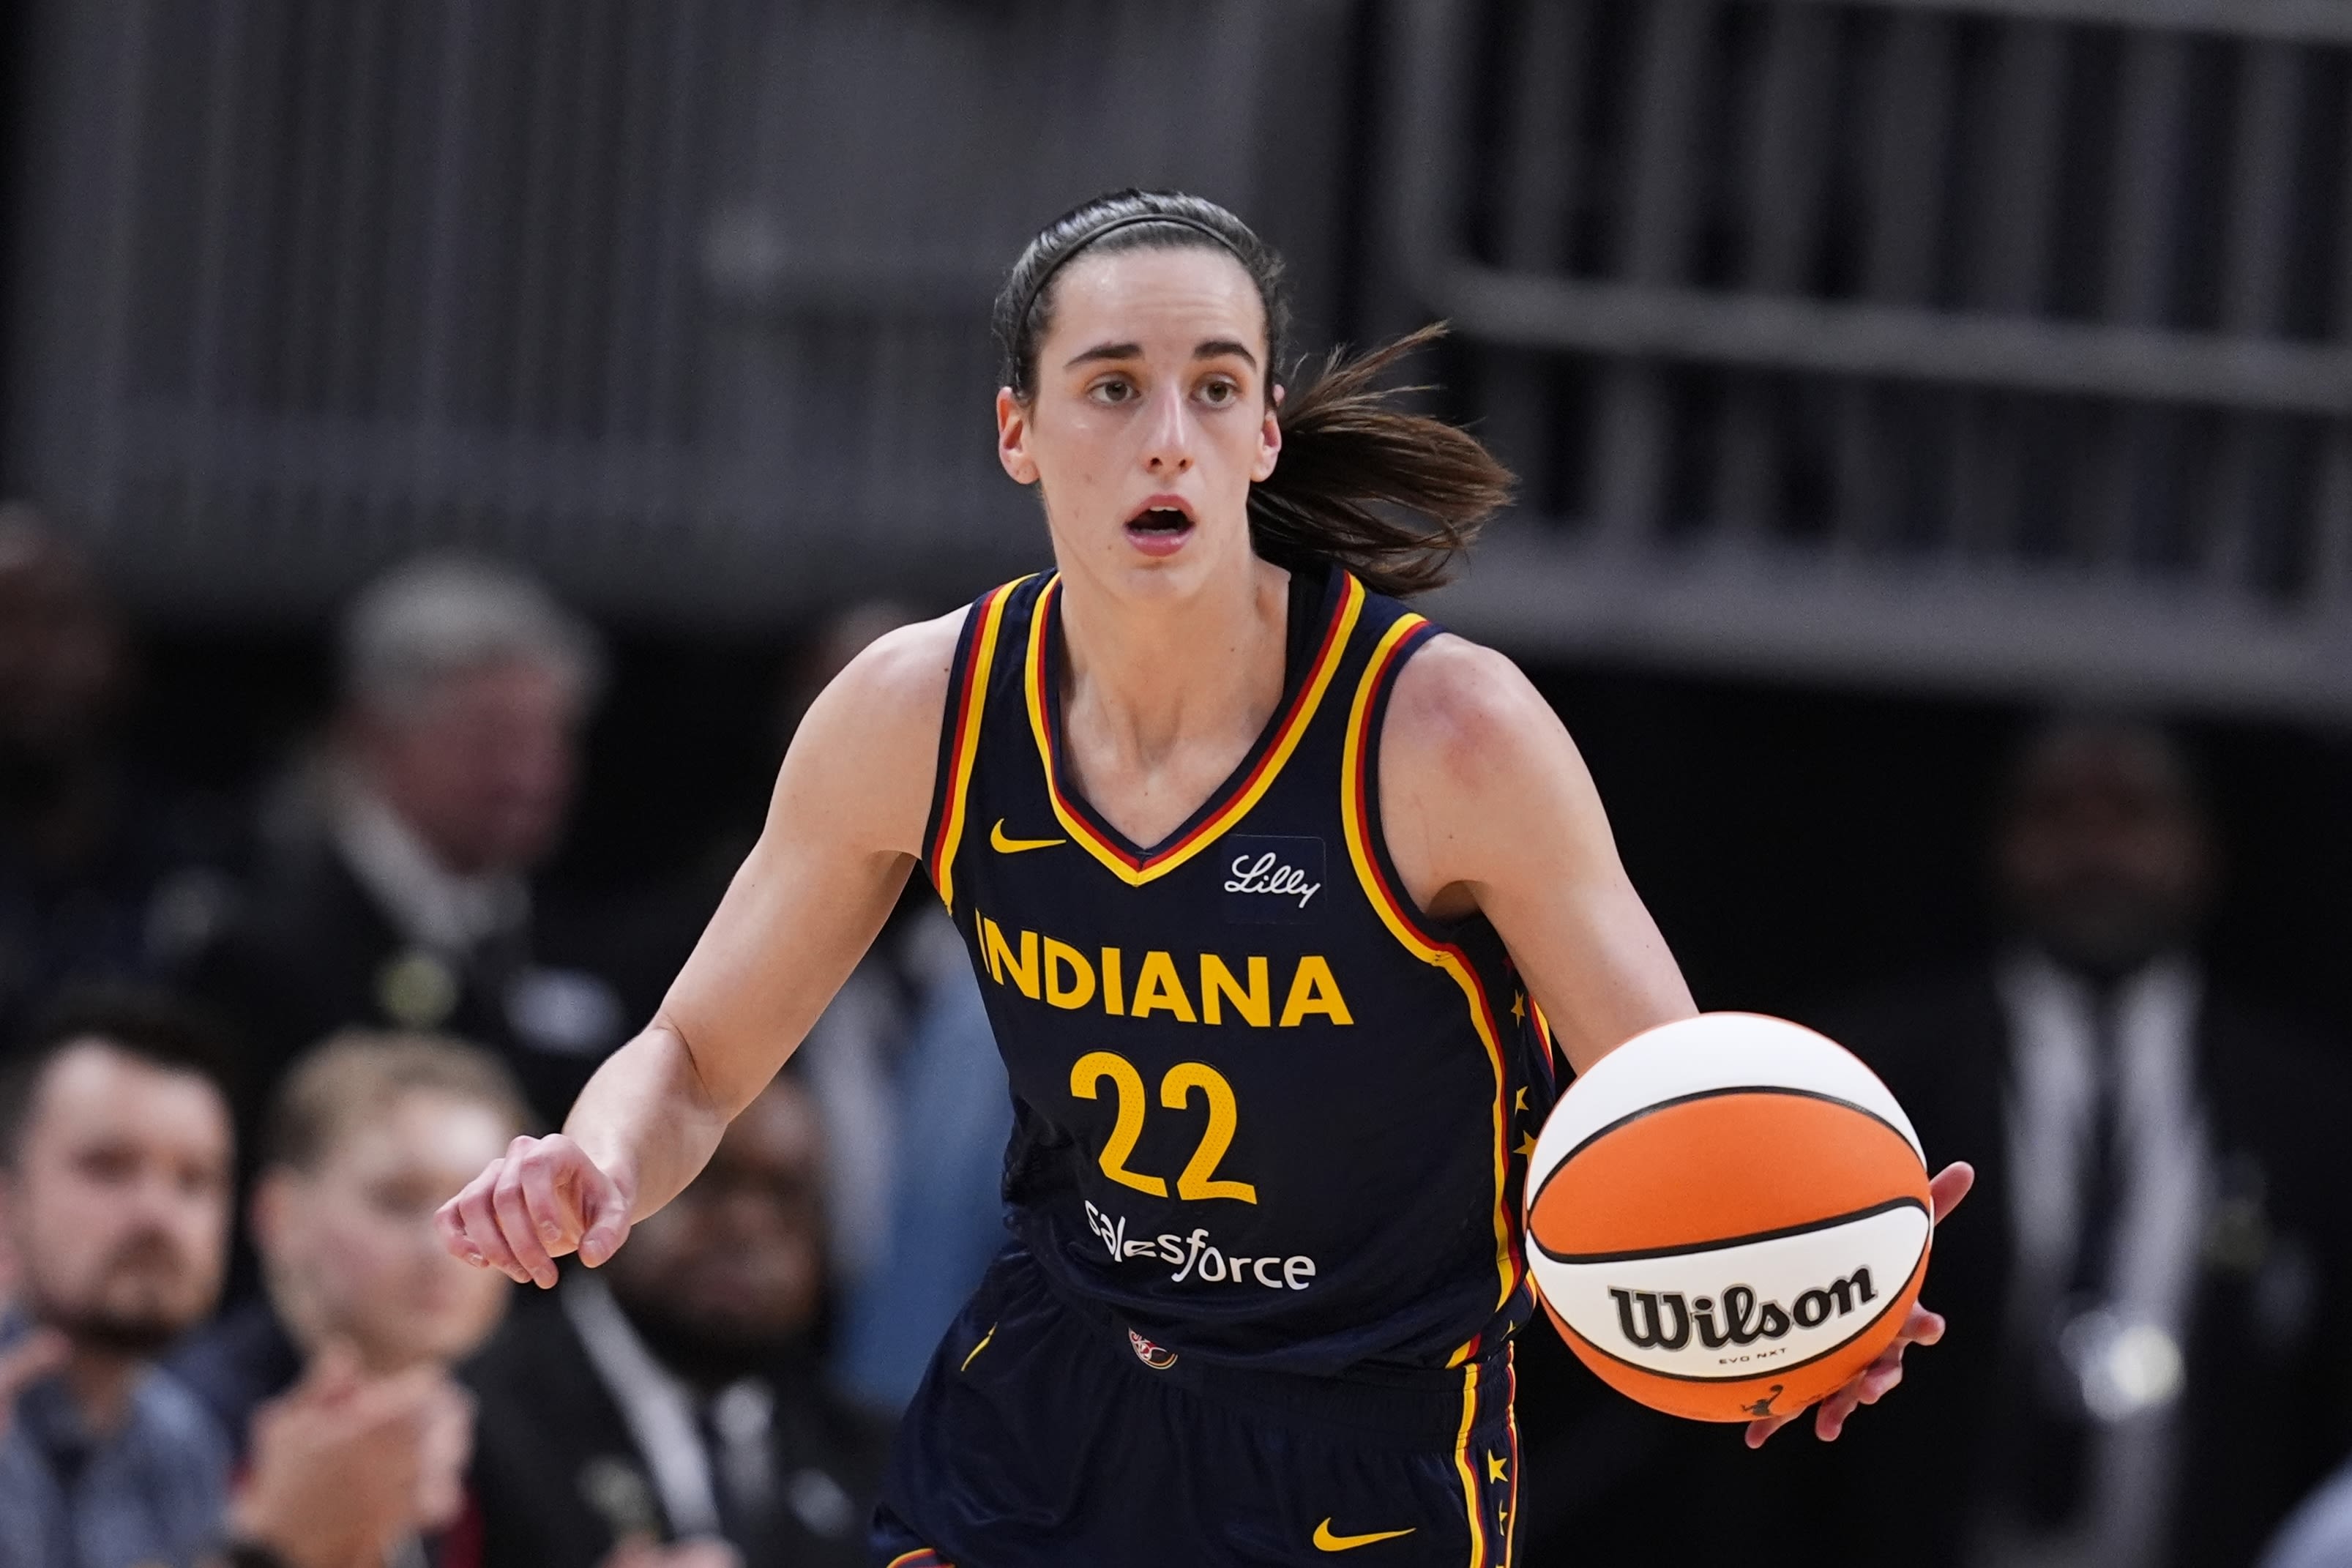 There are 11 times as many WNBA MVP bets on Caitlin Clark than any other player